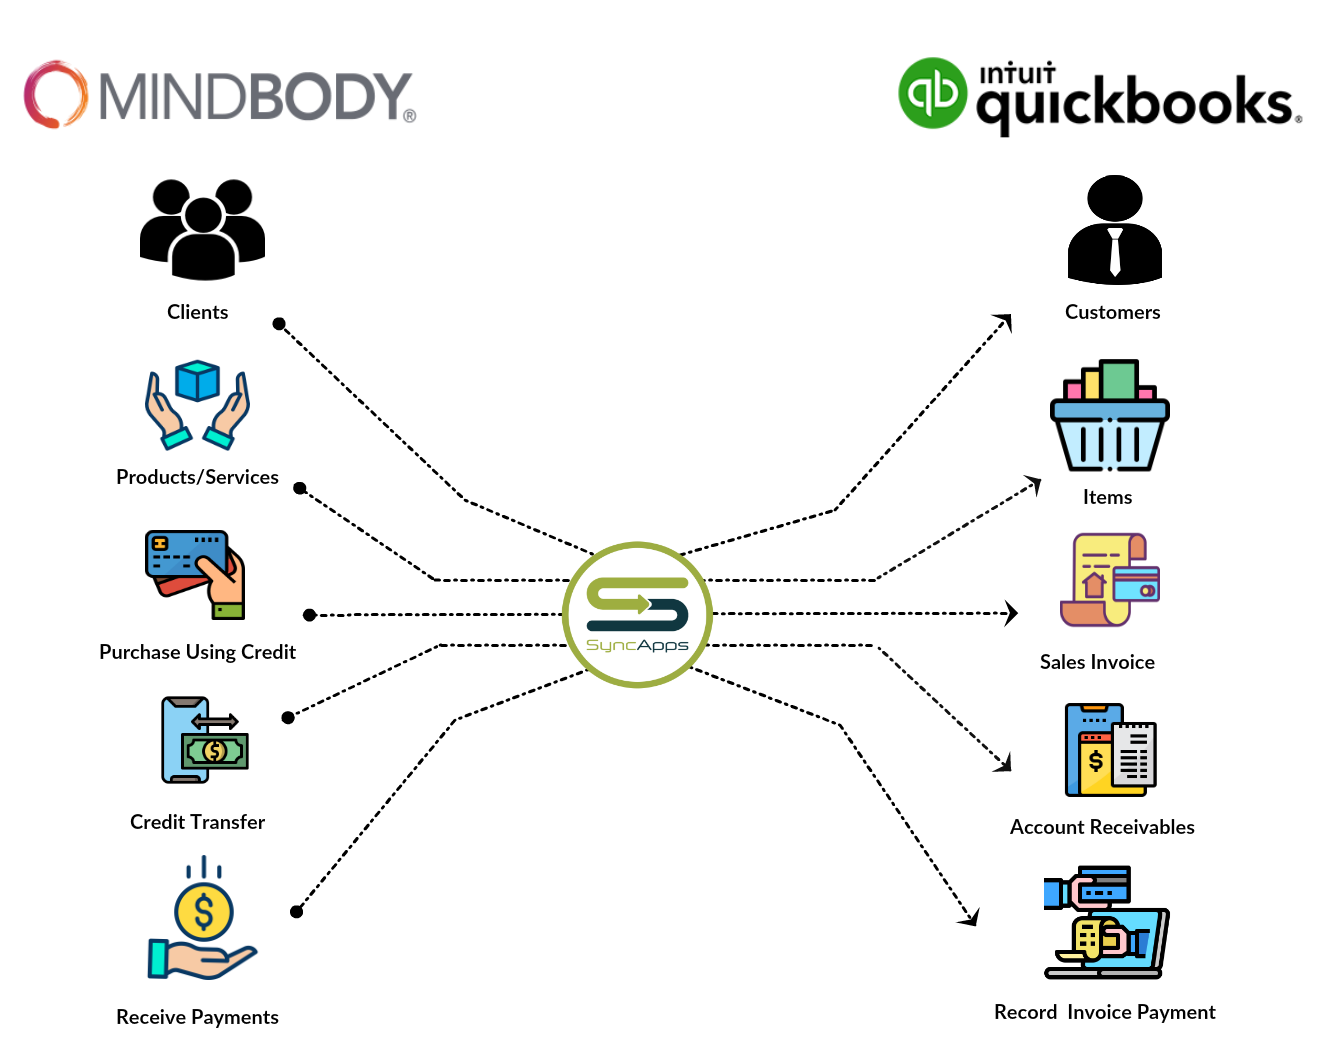 MINDBODY Online to Quickbooks Online Payments on Account